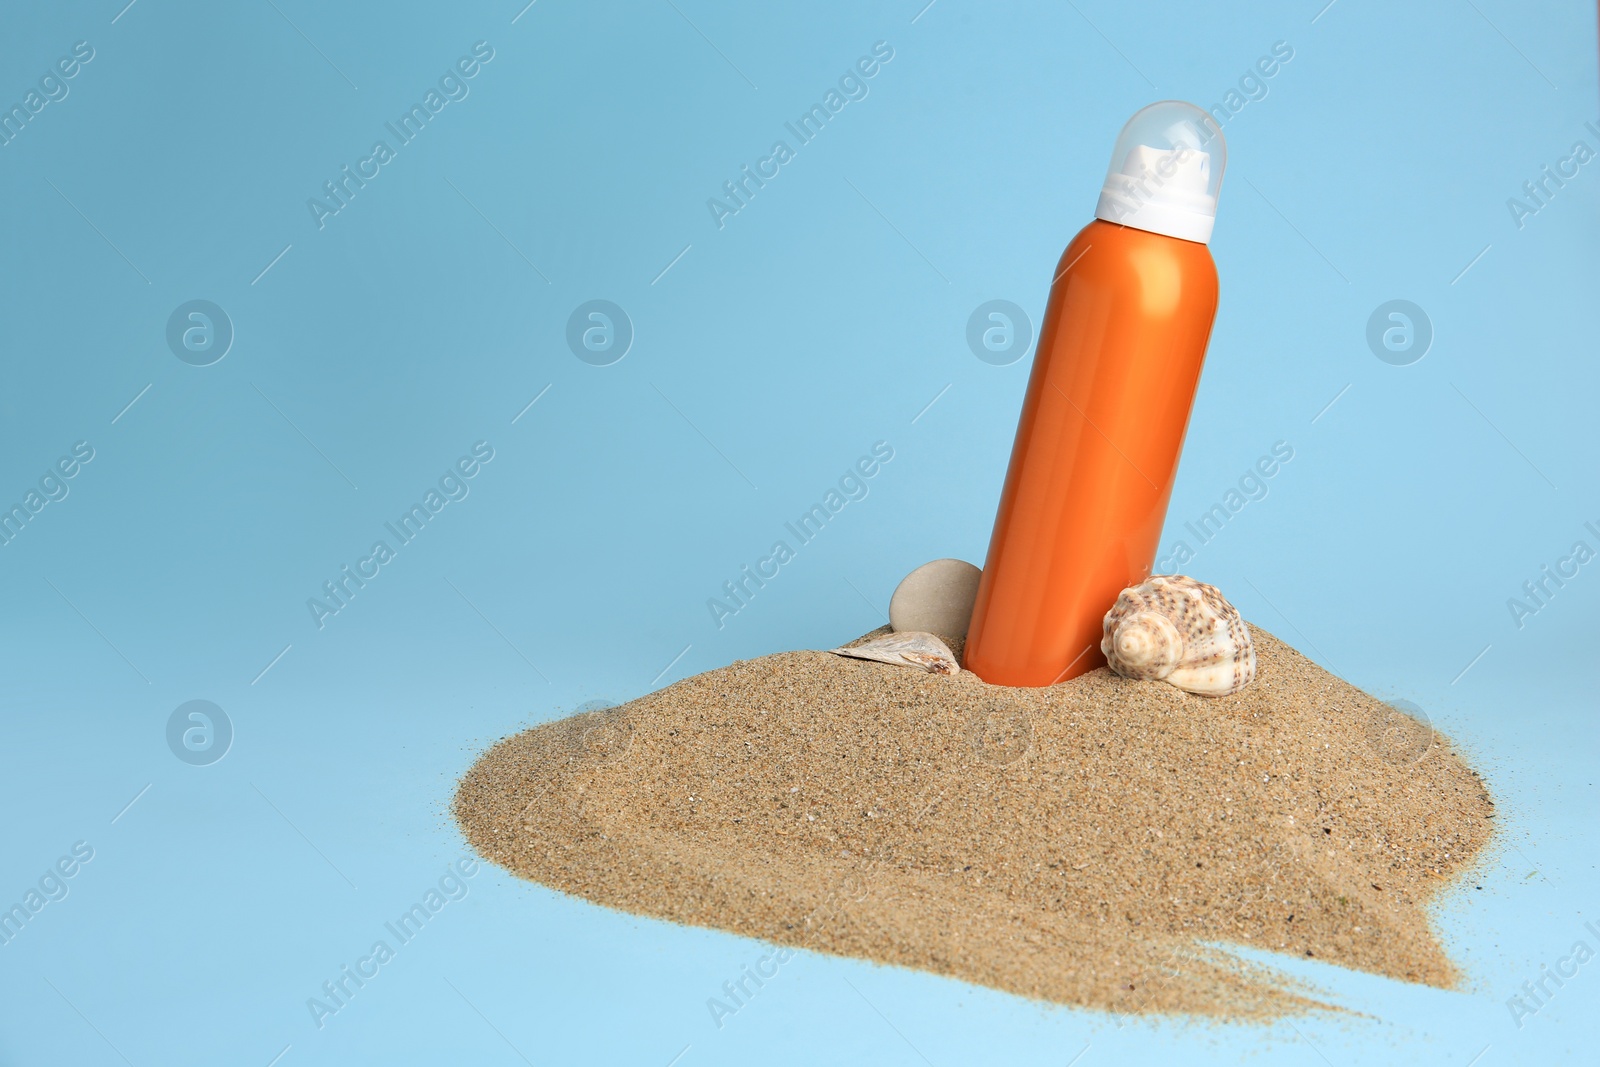 Photo of Sand with bottle of sunscreen, stone and seashell against light blue background, space for text. Sun protection